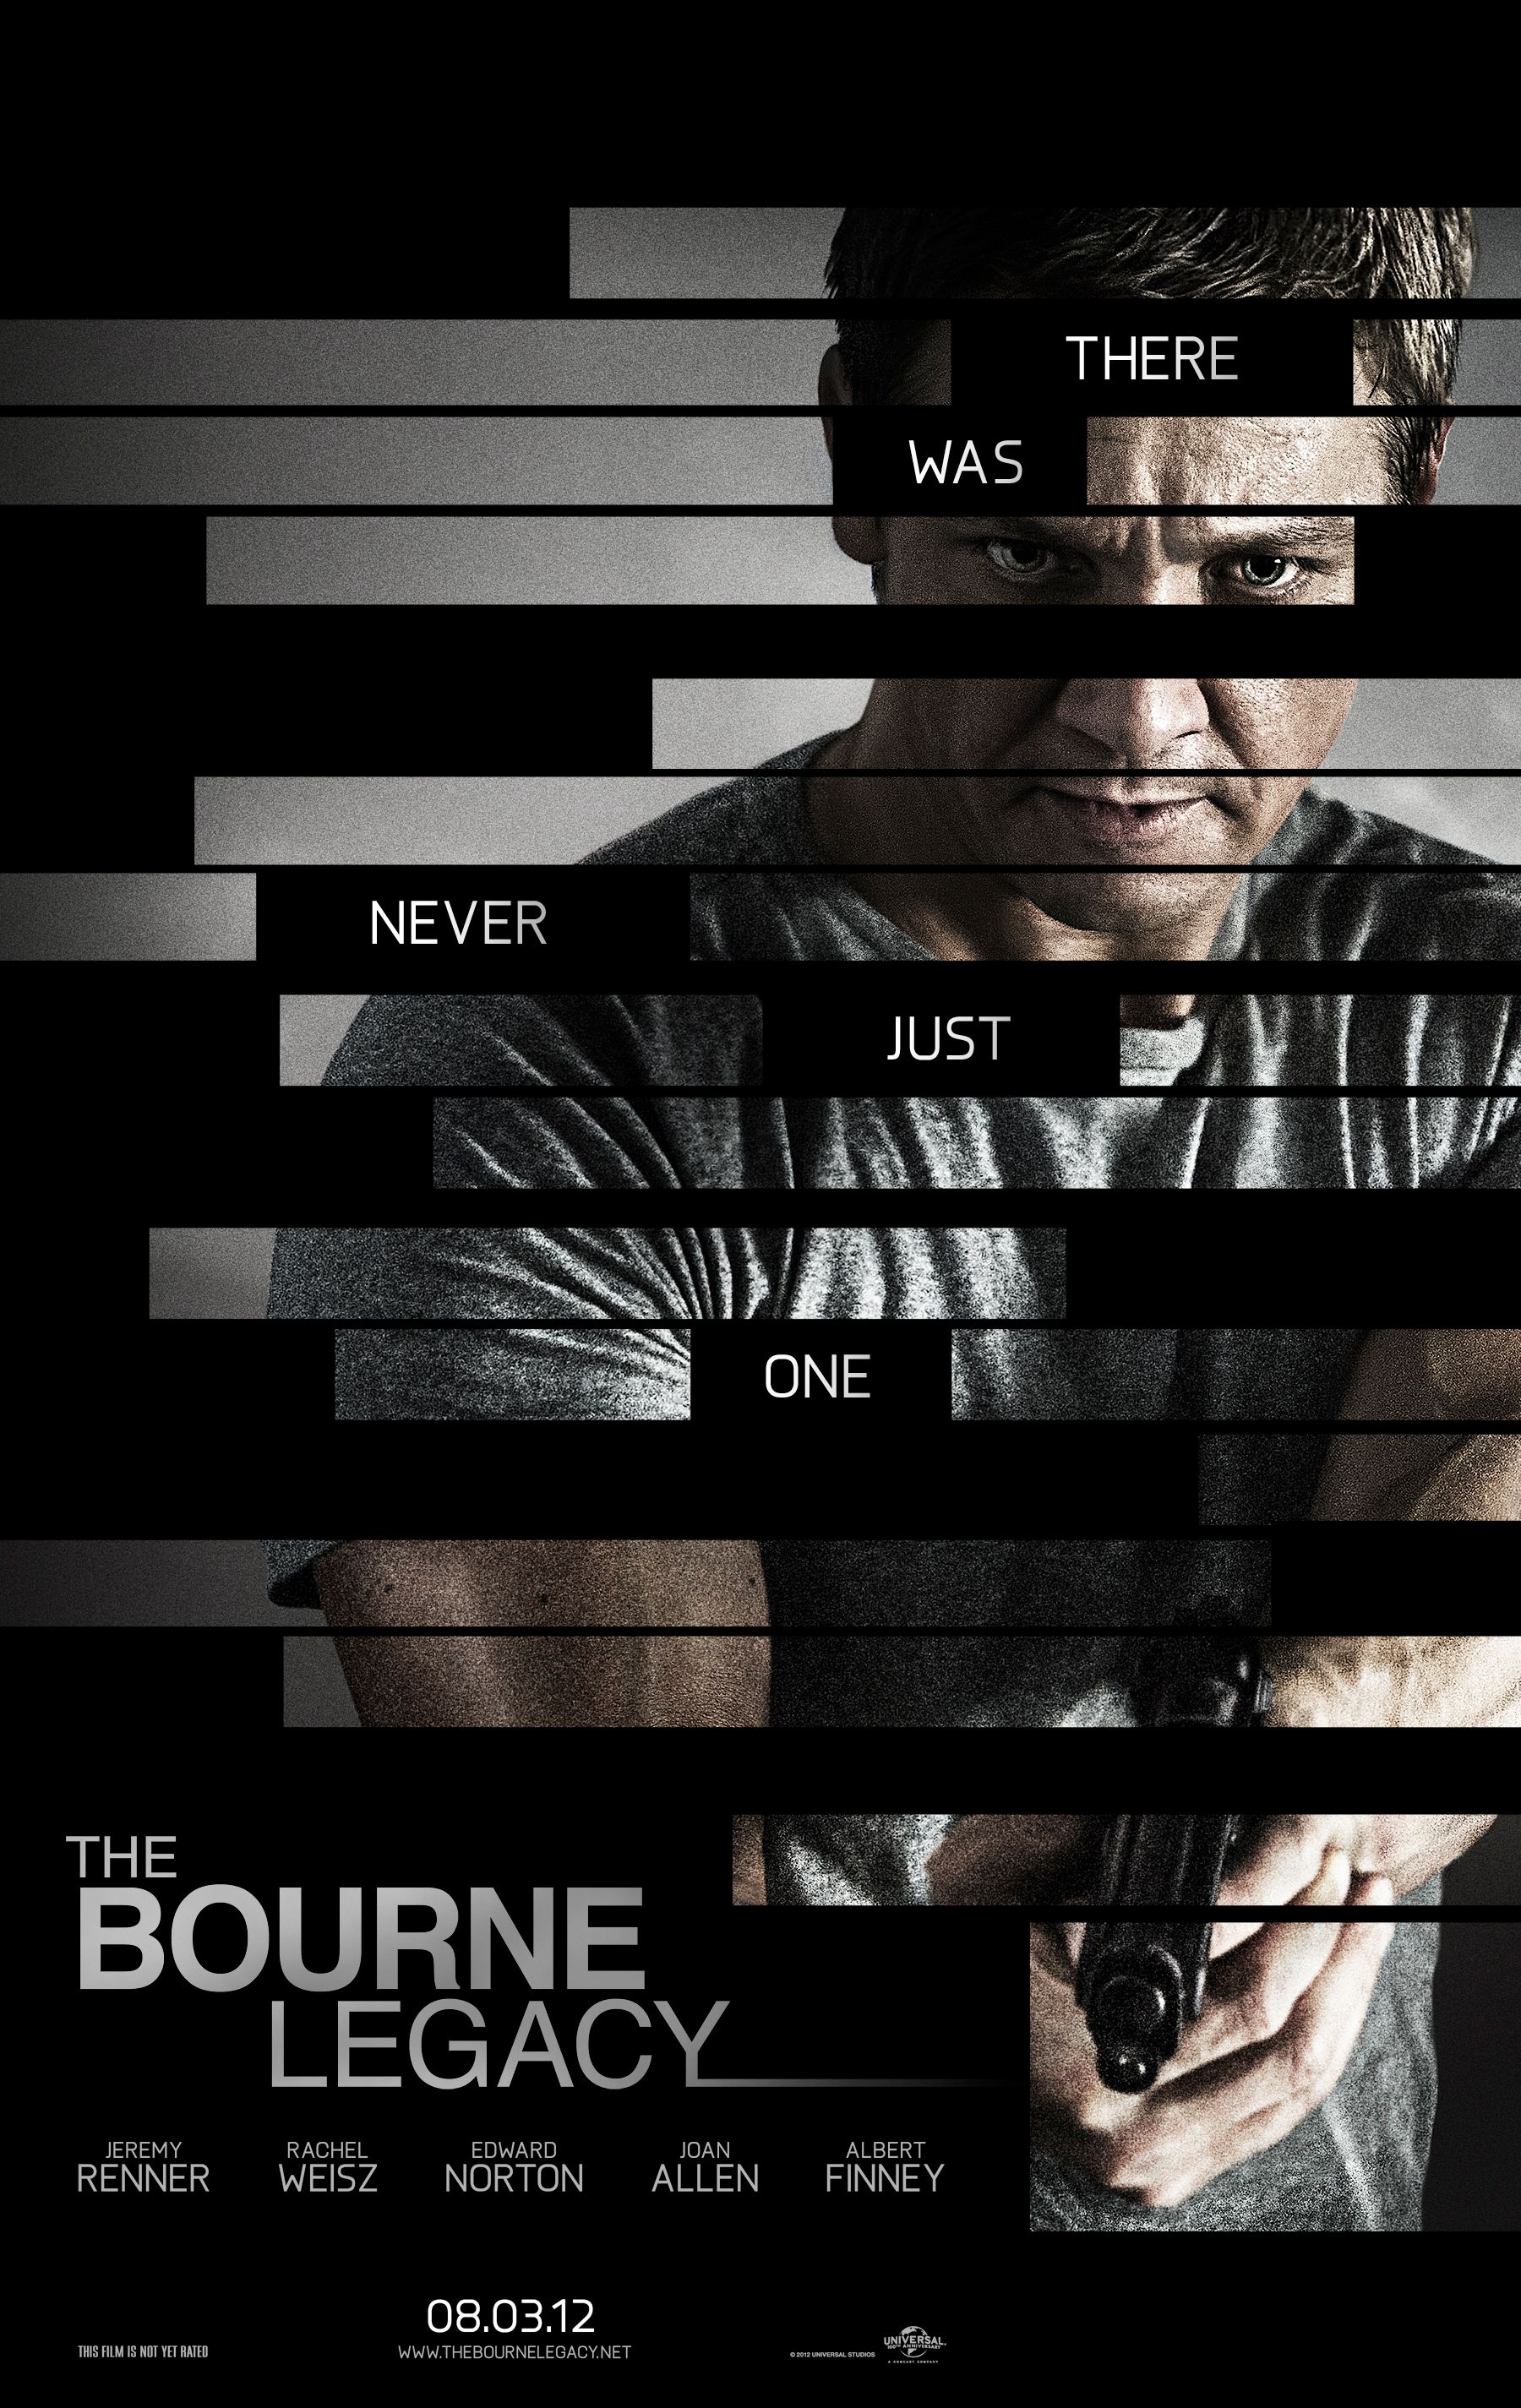 The Bourne Legacy: Posters #2